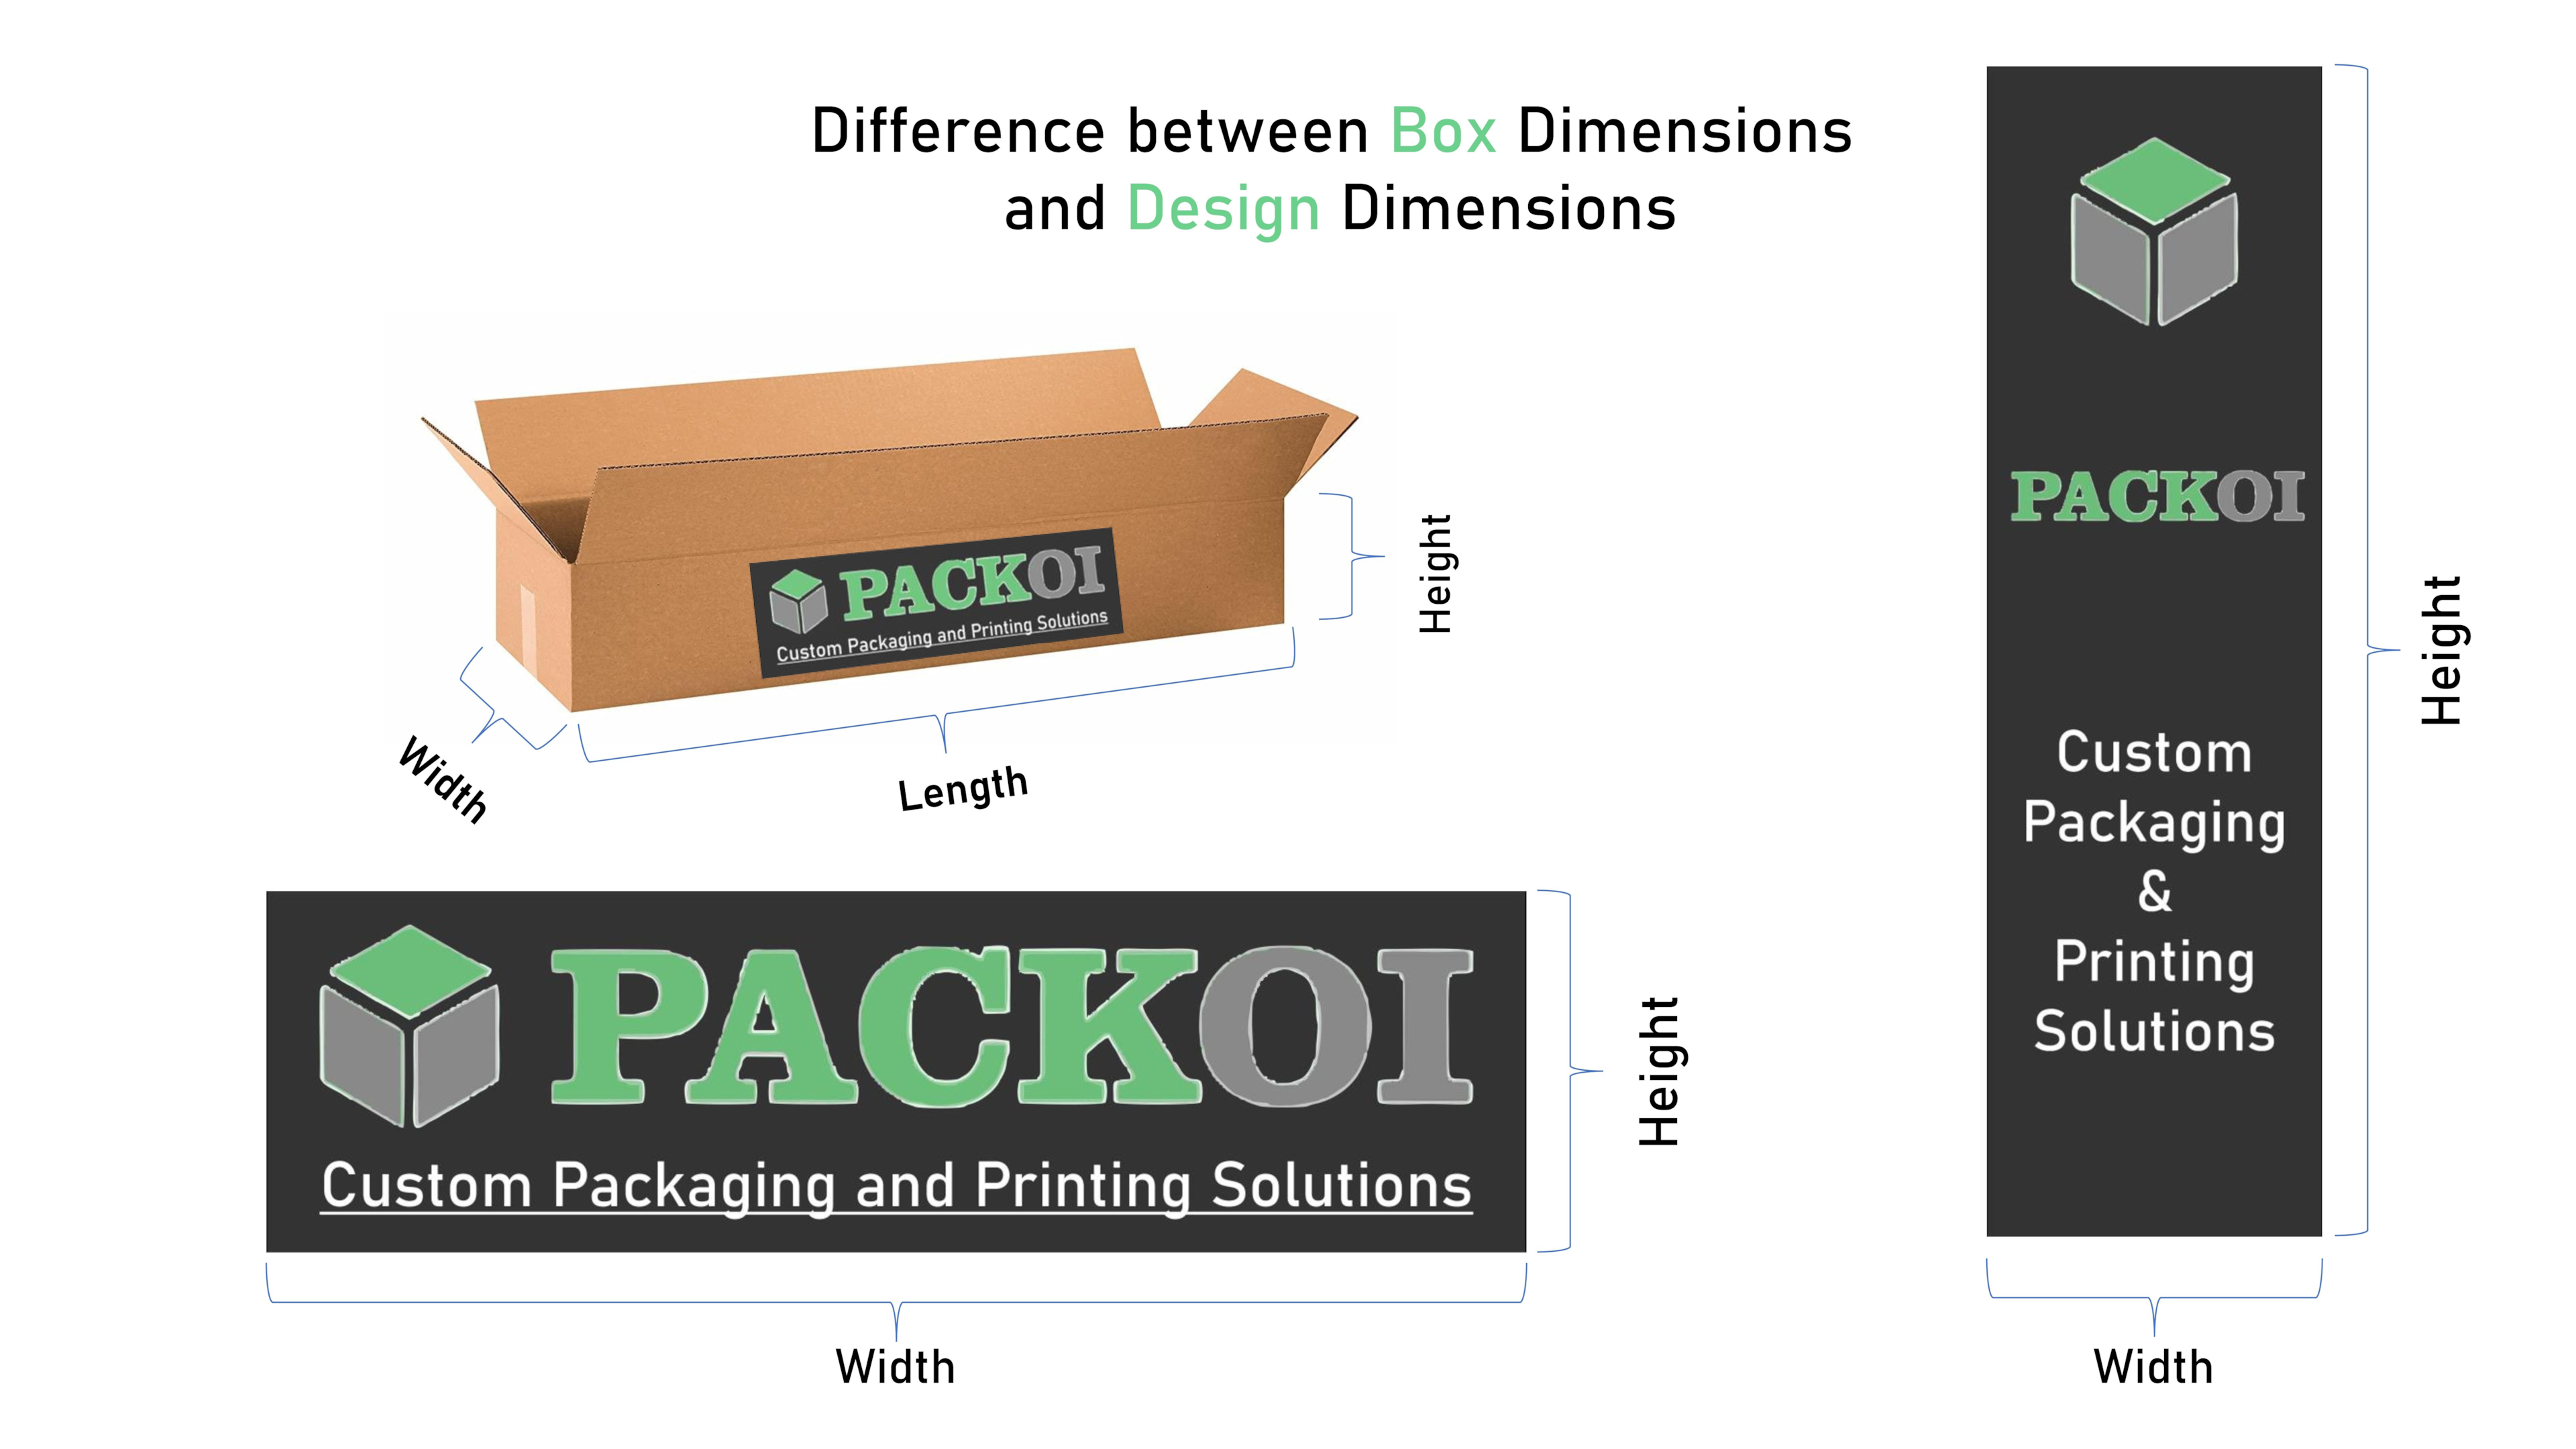 Differnce Between Box & Design Dimensions